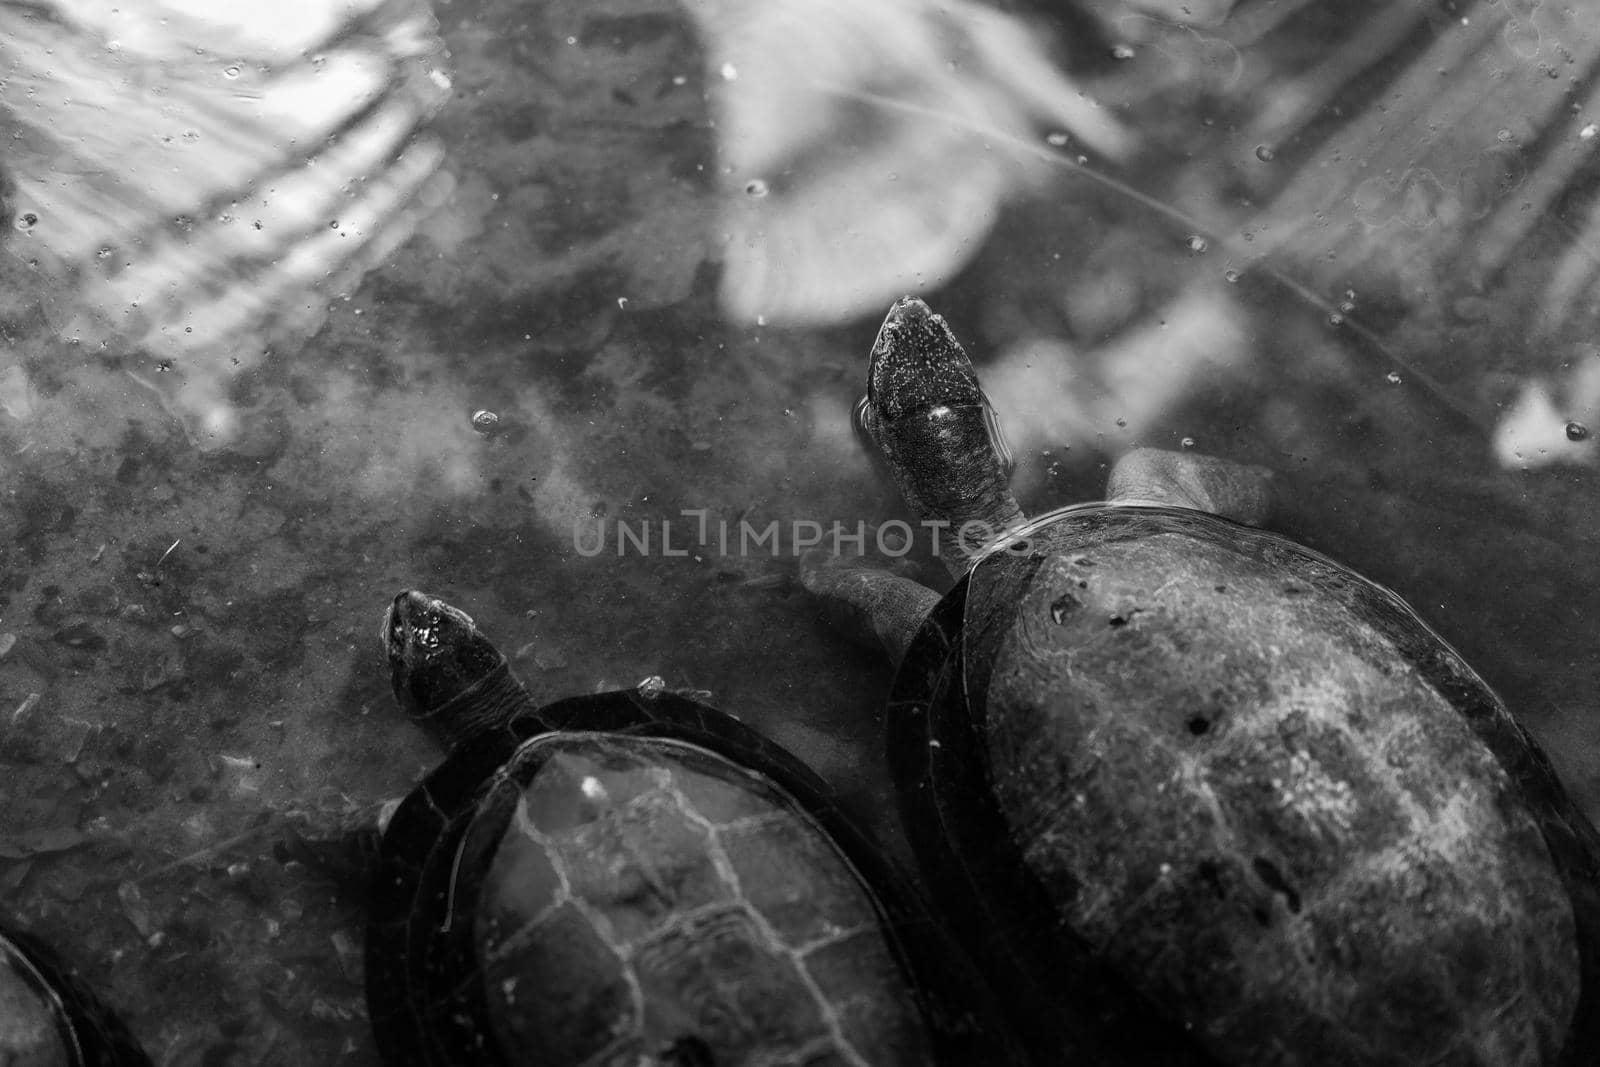 The turtles in the water by domonite